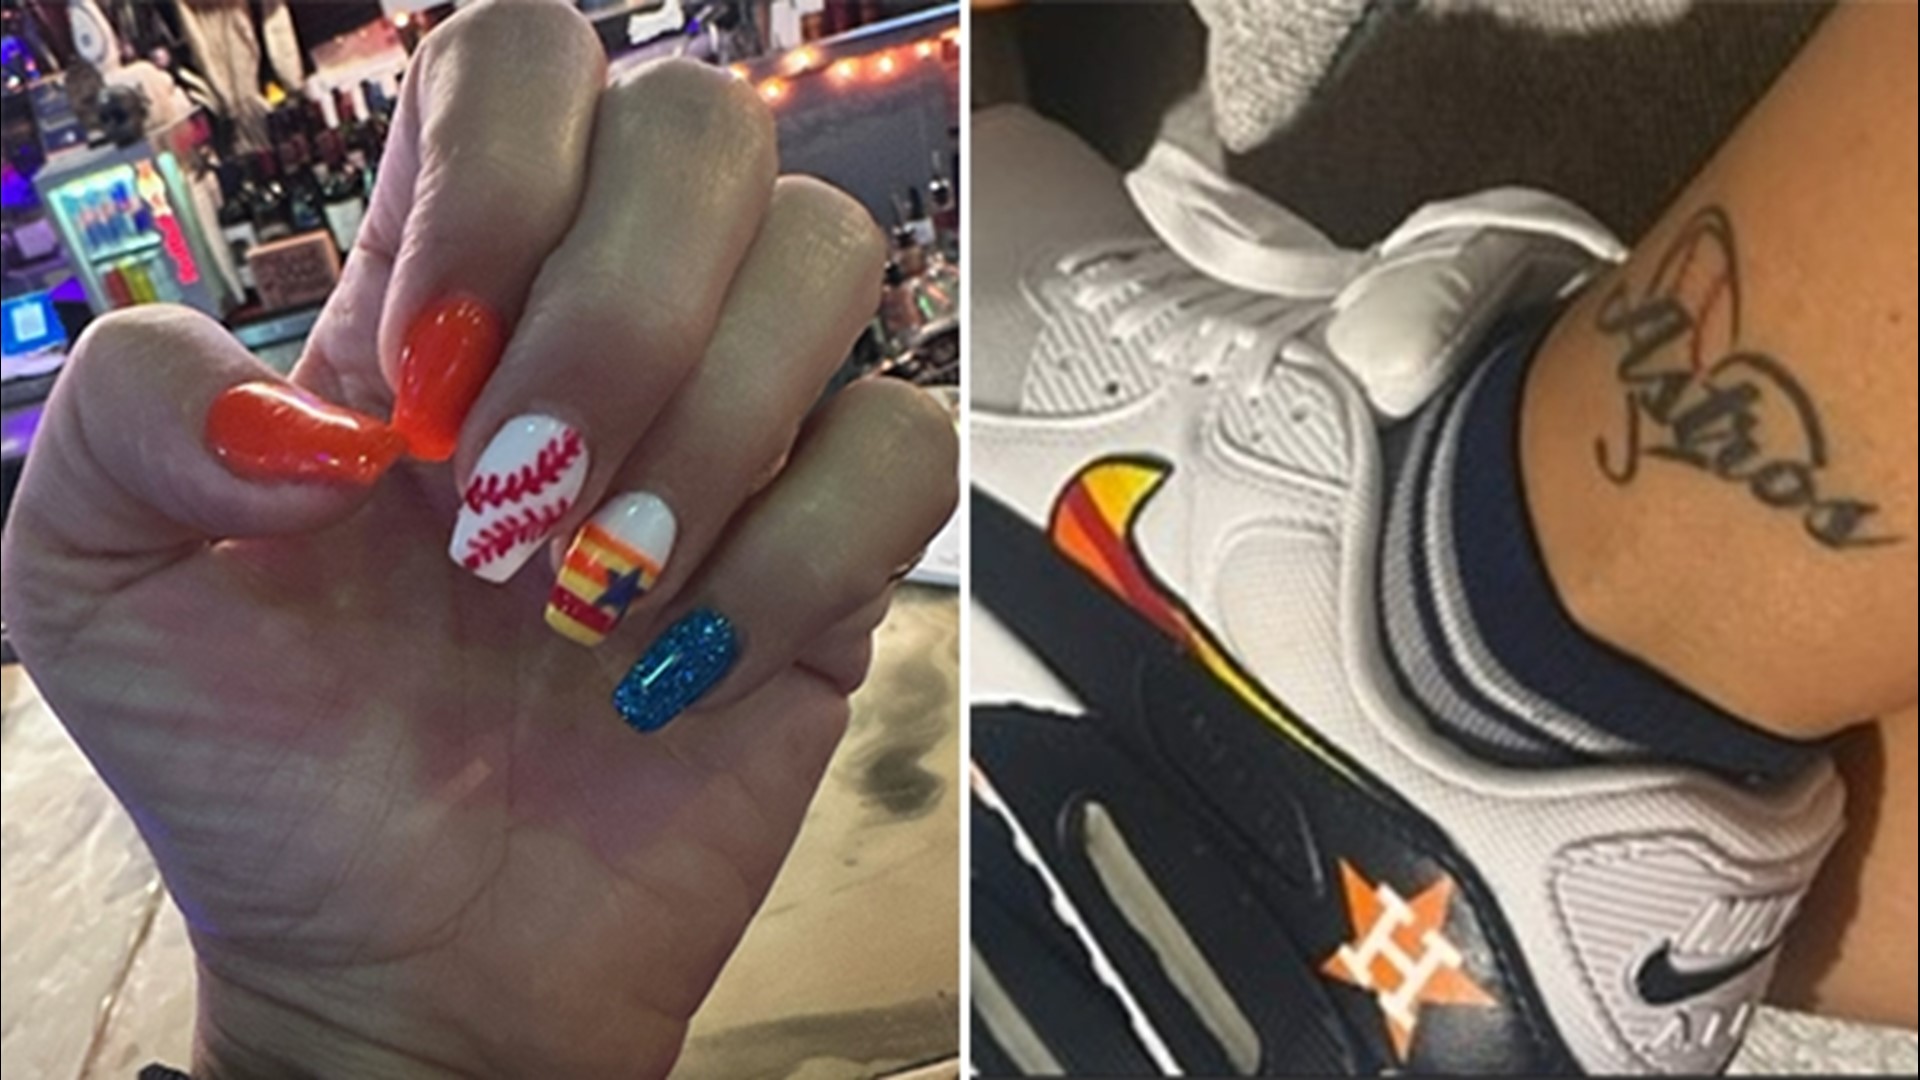 Astros superfan continues love affair from a distance